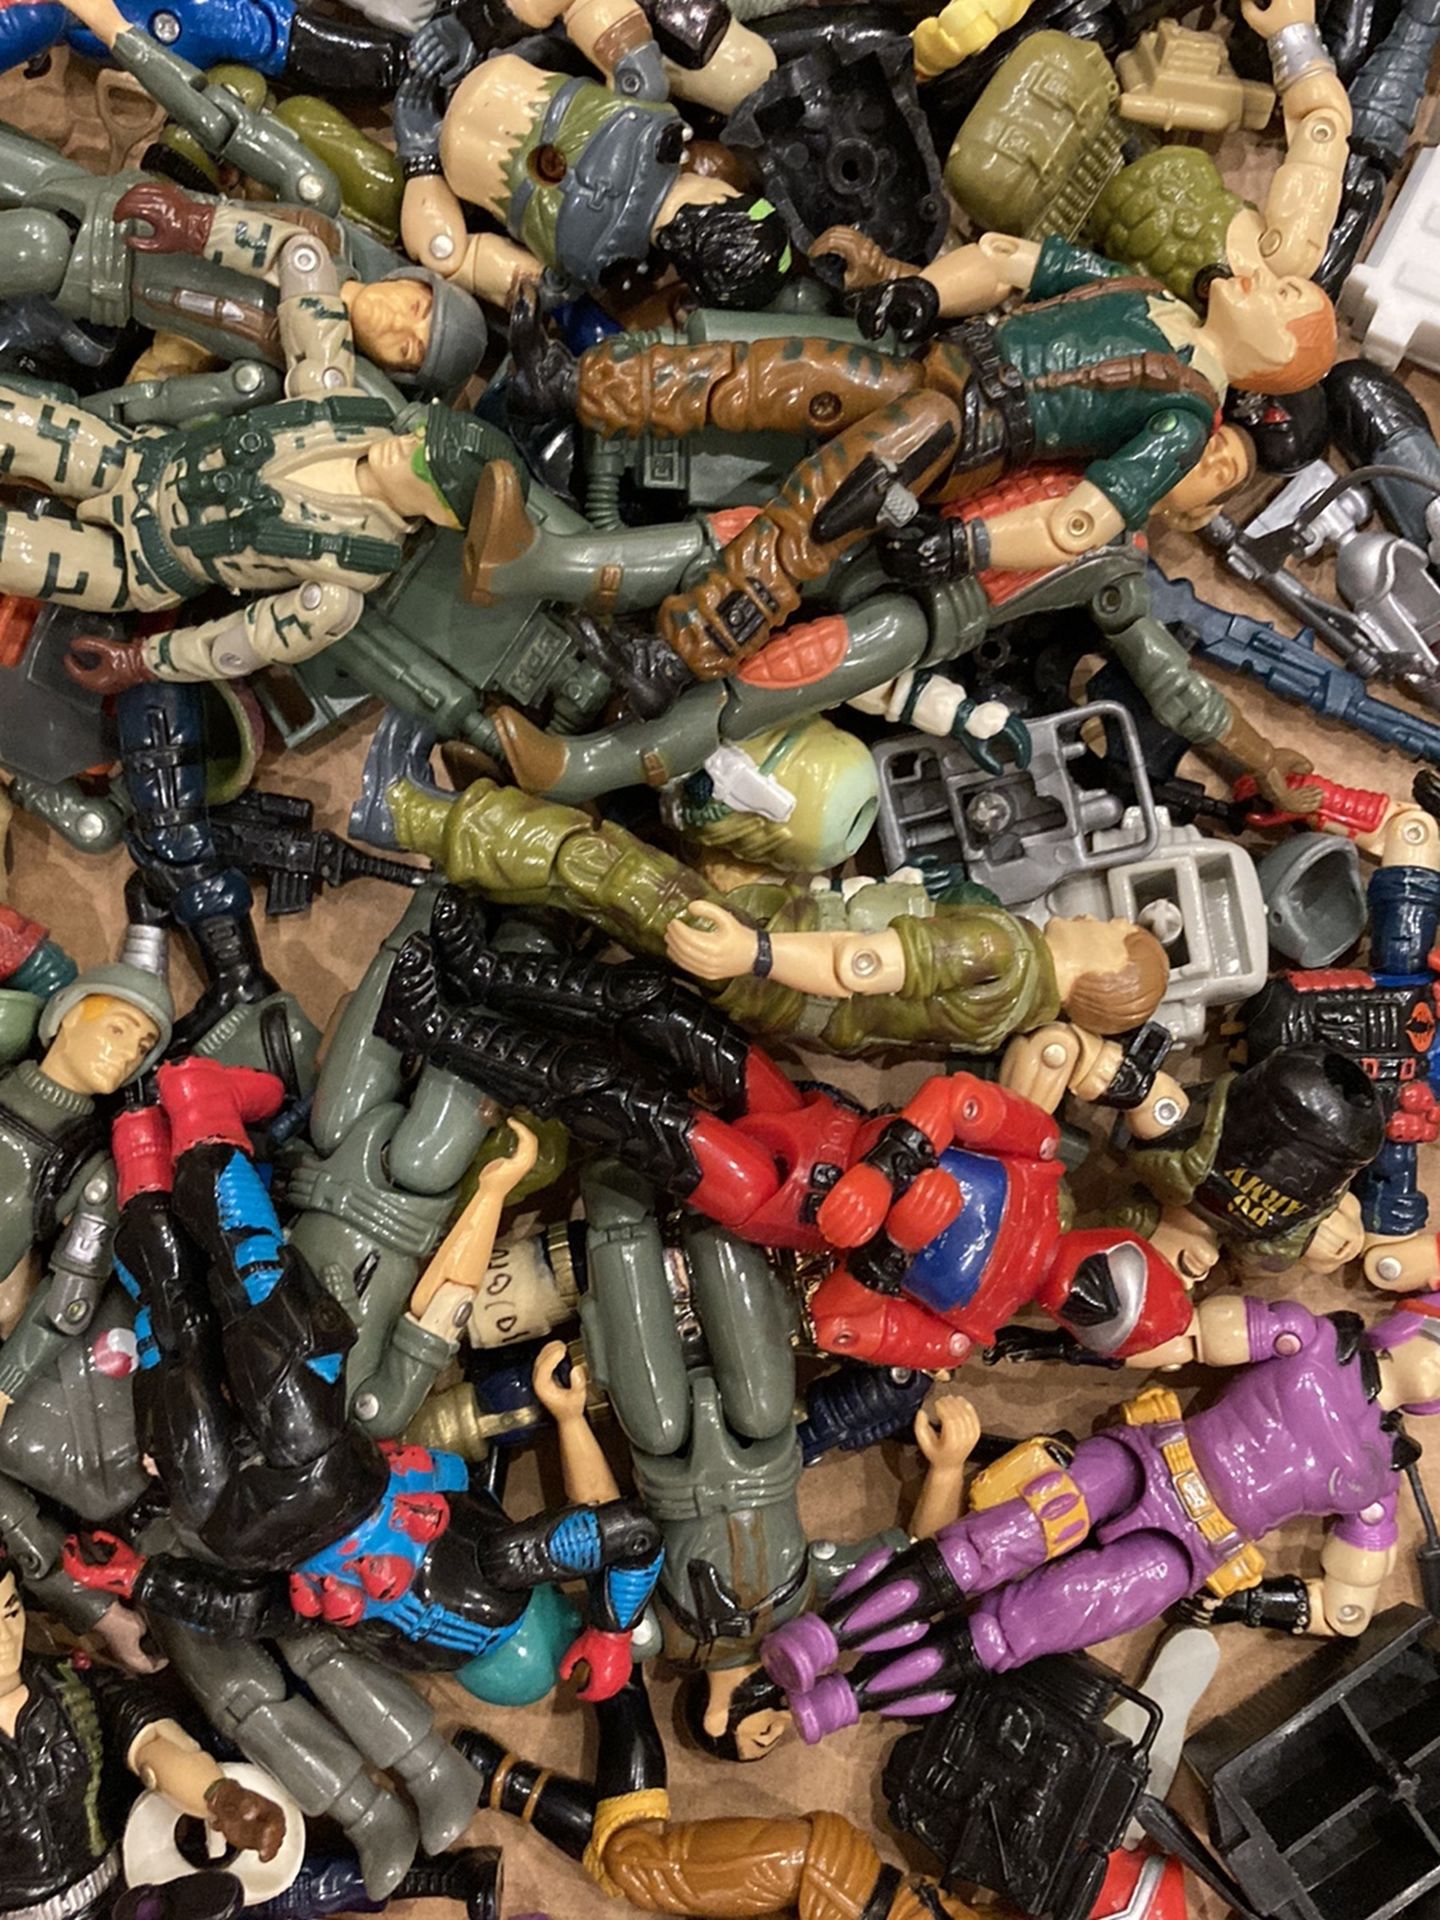 Collector seeking vintage old GI Joe toys dolls and action figures accessories 1960s 70s 1980s g.i. Joes toy figure doll collector 